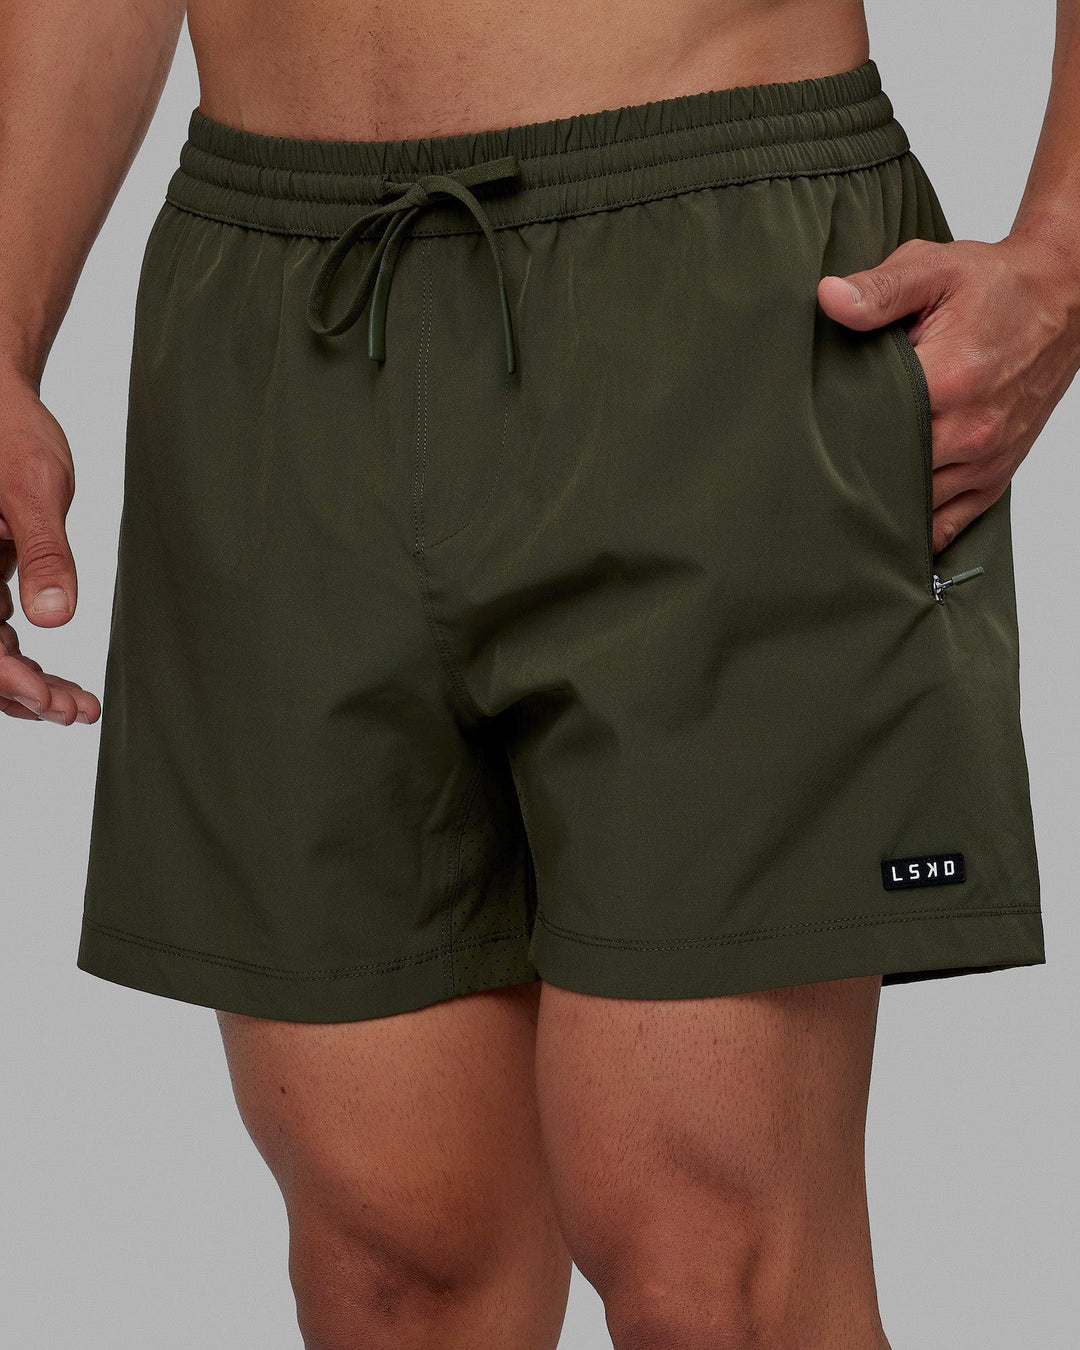 Man wearing Rep 5'' Performance Short - Forest Night